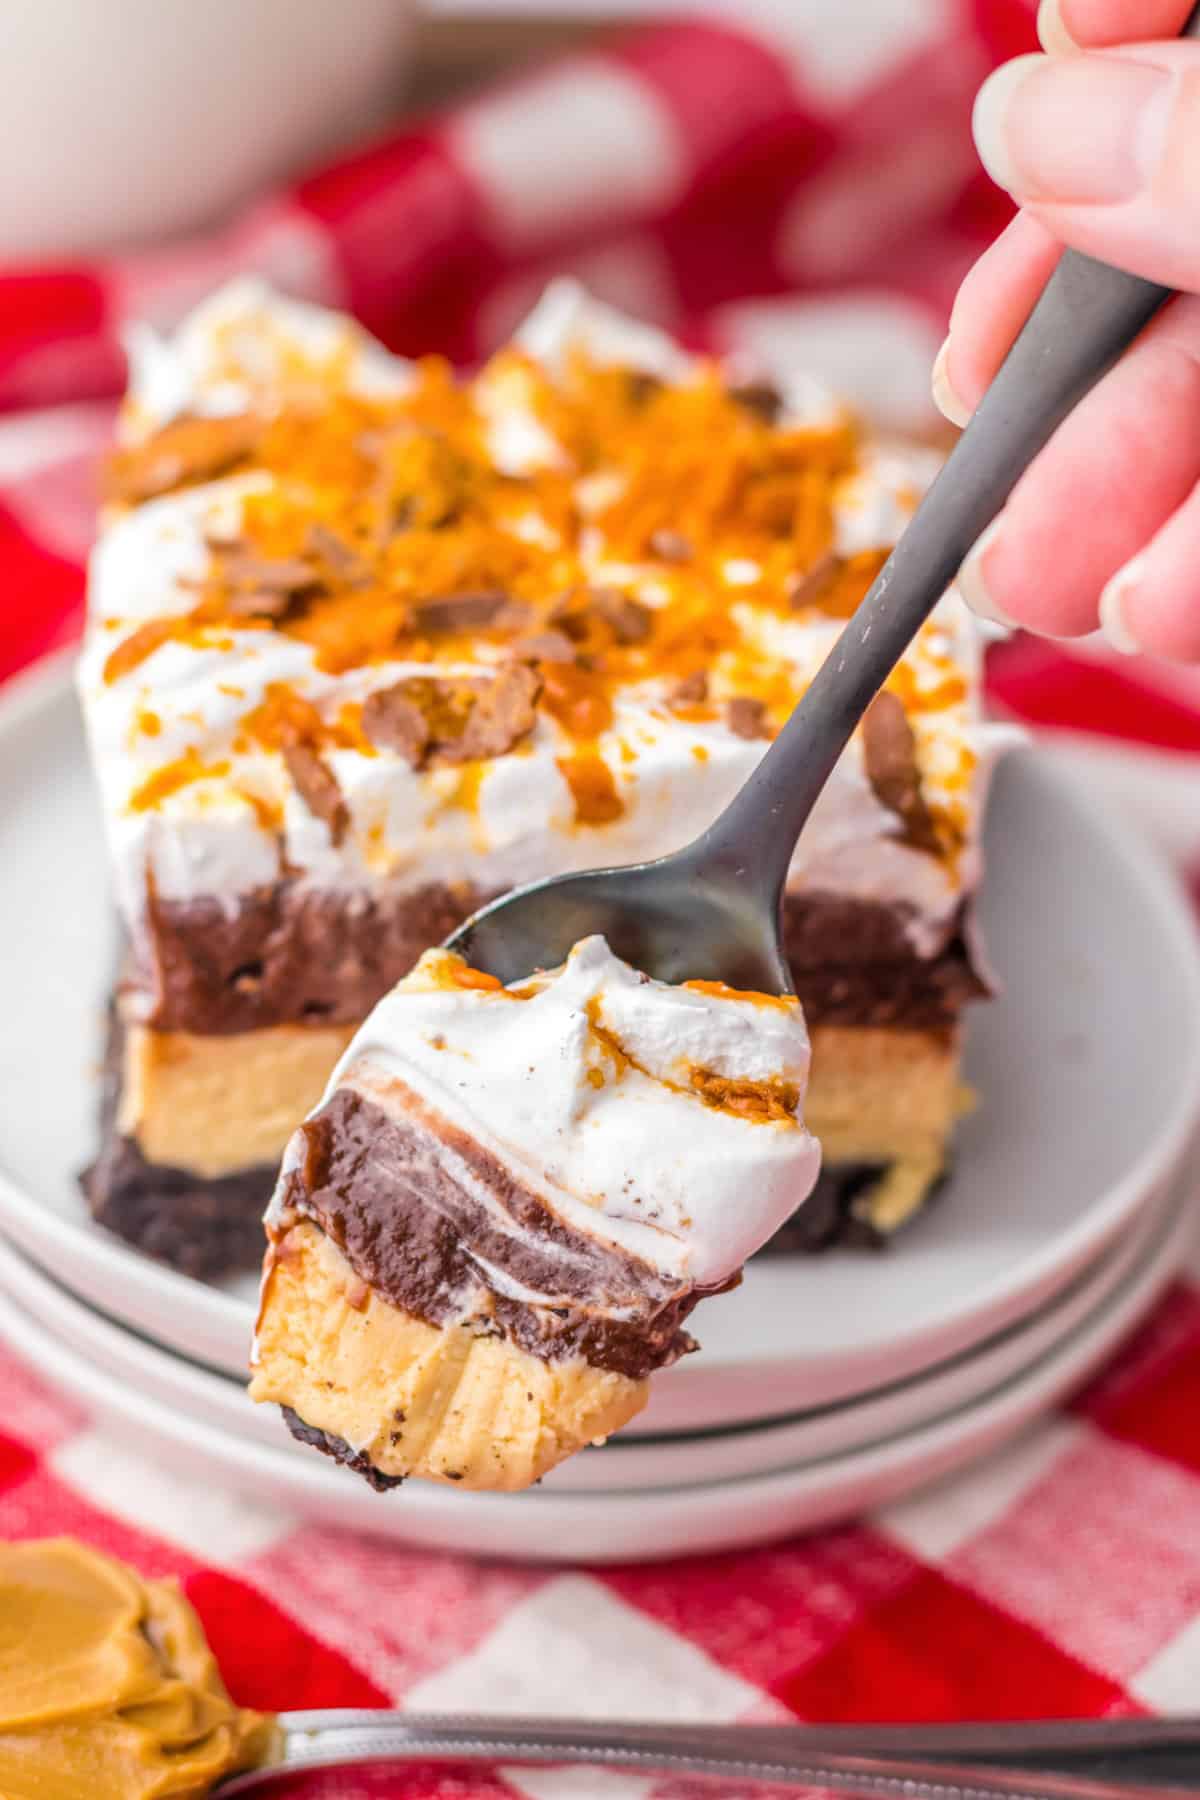 Spoonful of layered butterfinger dessert.